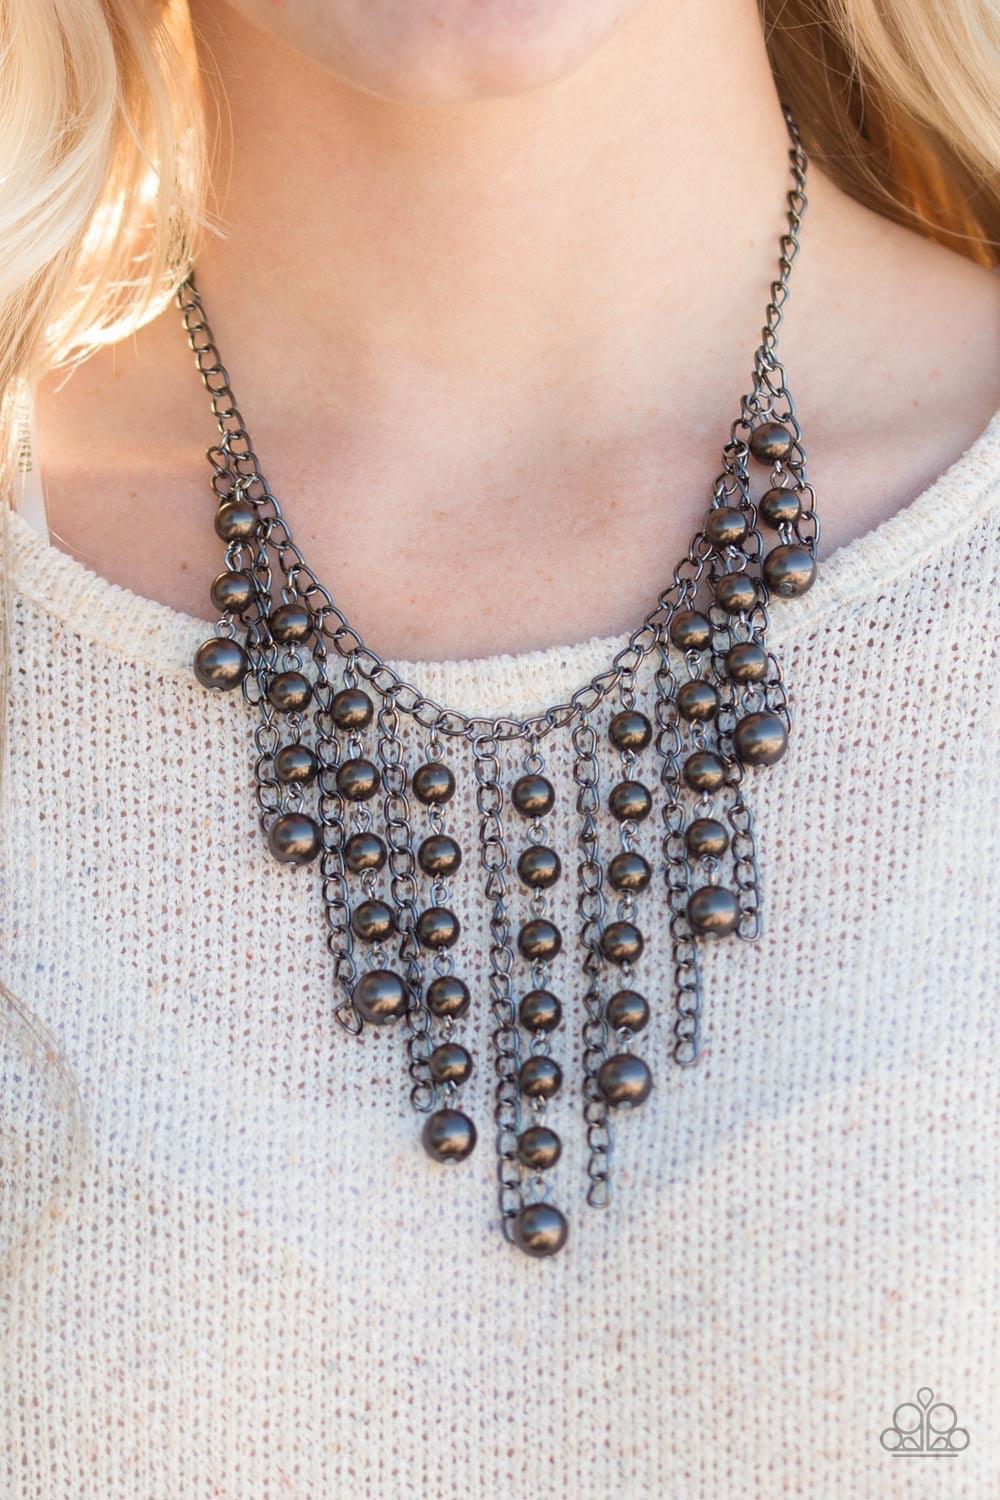 Paparazzi Accessories STUN Control - Black Pearly gunmetal beads trickle along strands of glistening gunmetal chains, creating a tapered fringe below the collar. Features an adjustable clasp closure. Jewelry